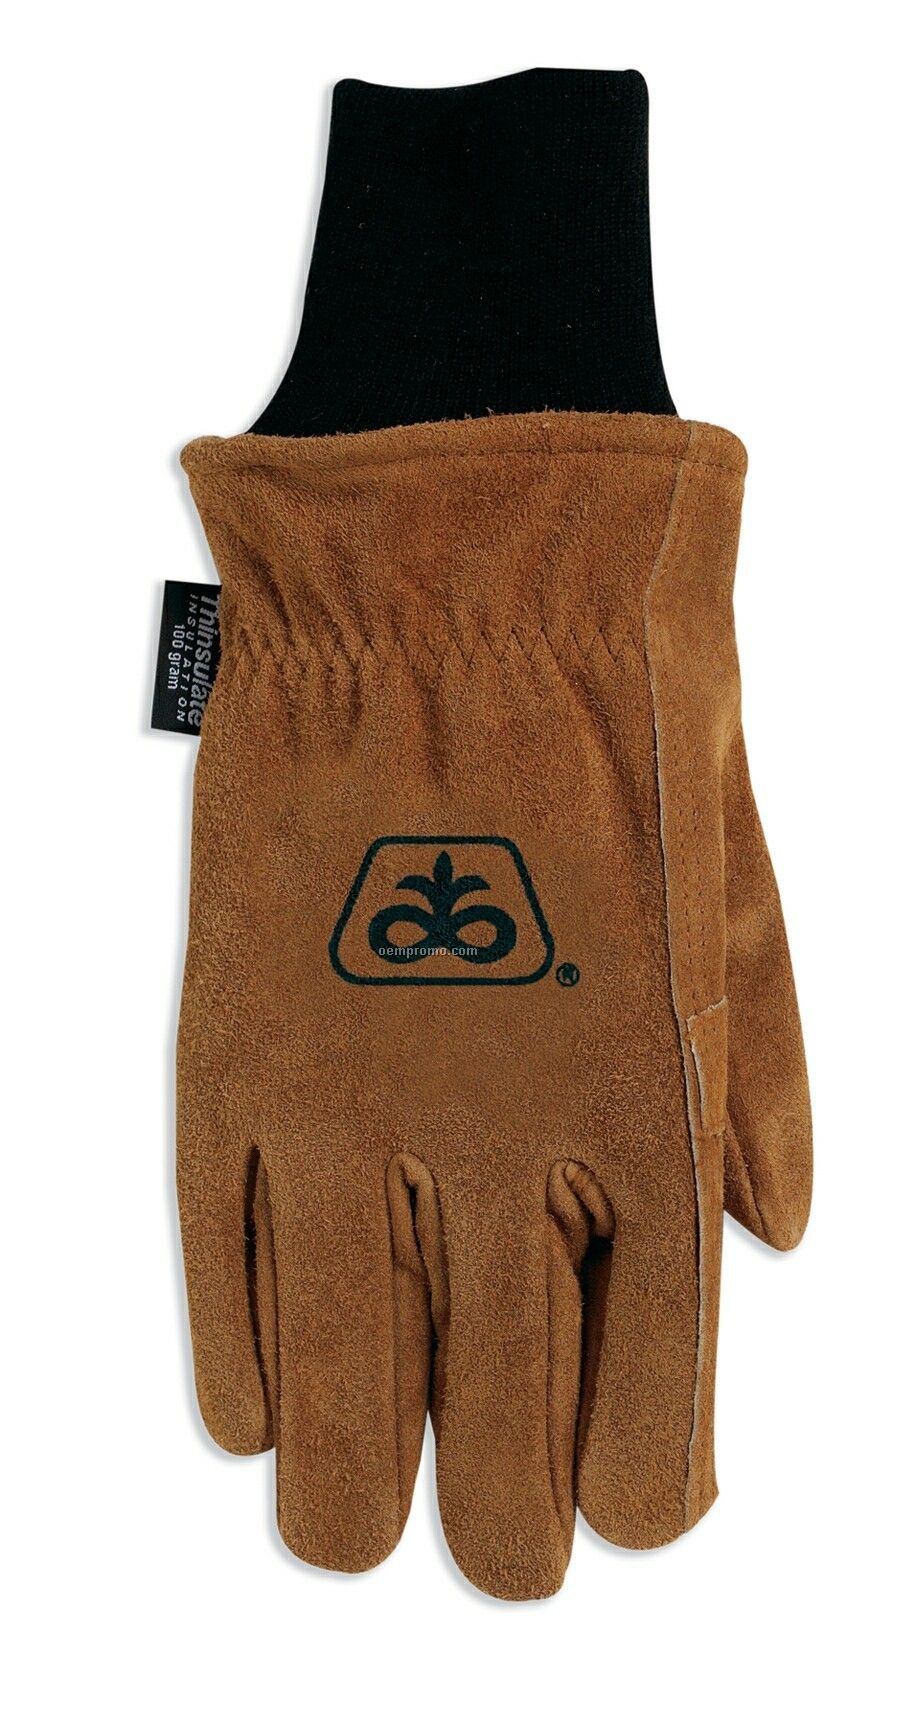 Thinsulate-lined Cow Split Leather Glove W/ Knit Wrist & Double Palm (S-xl)